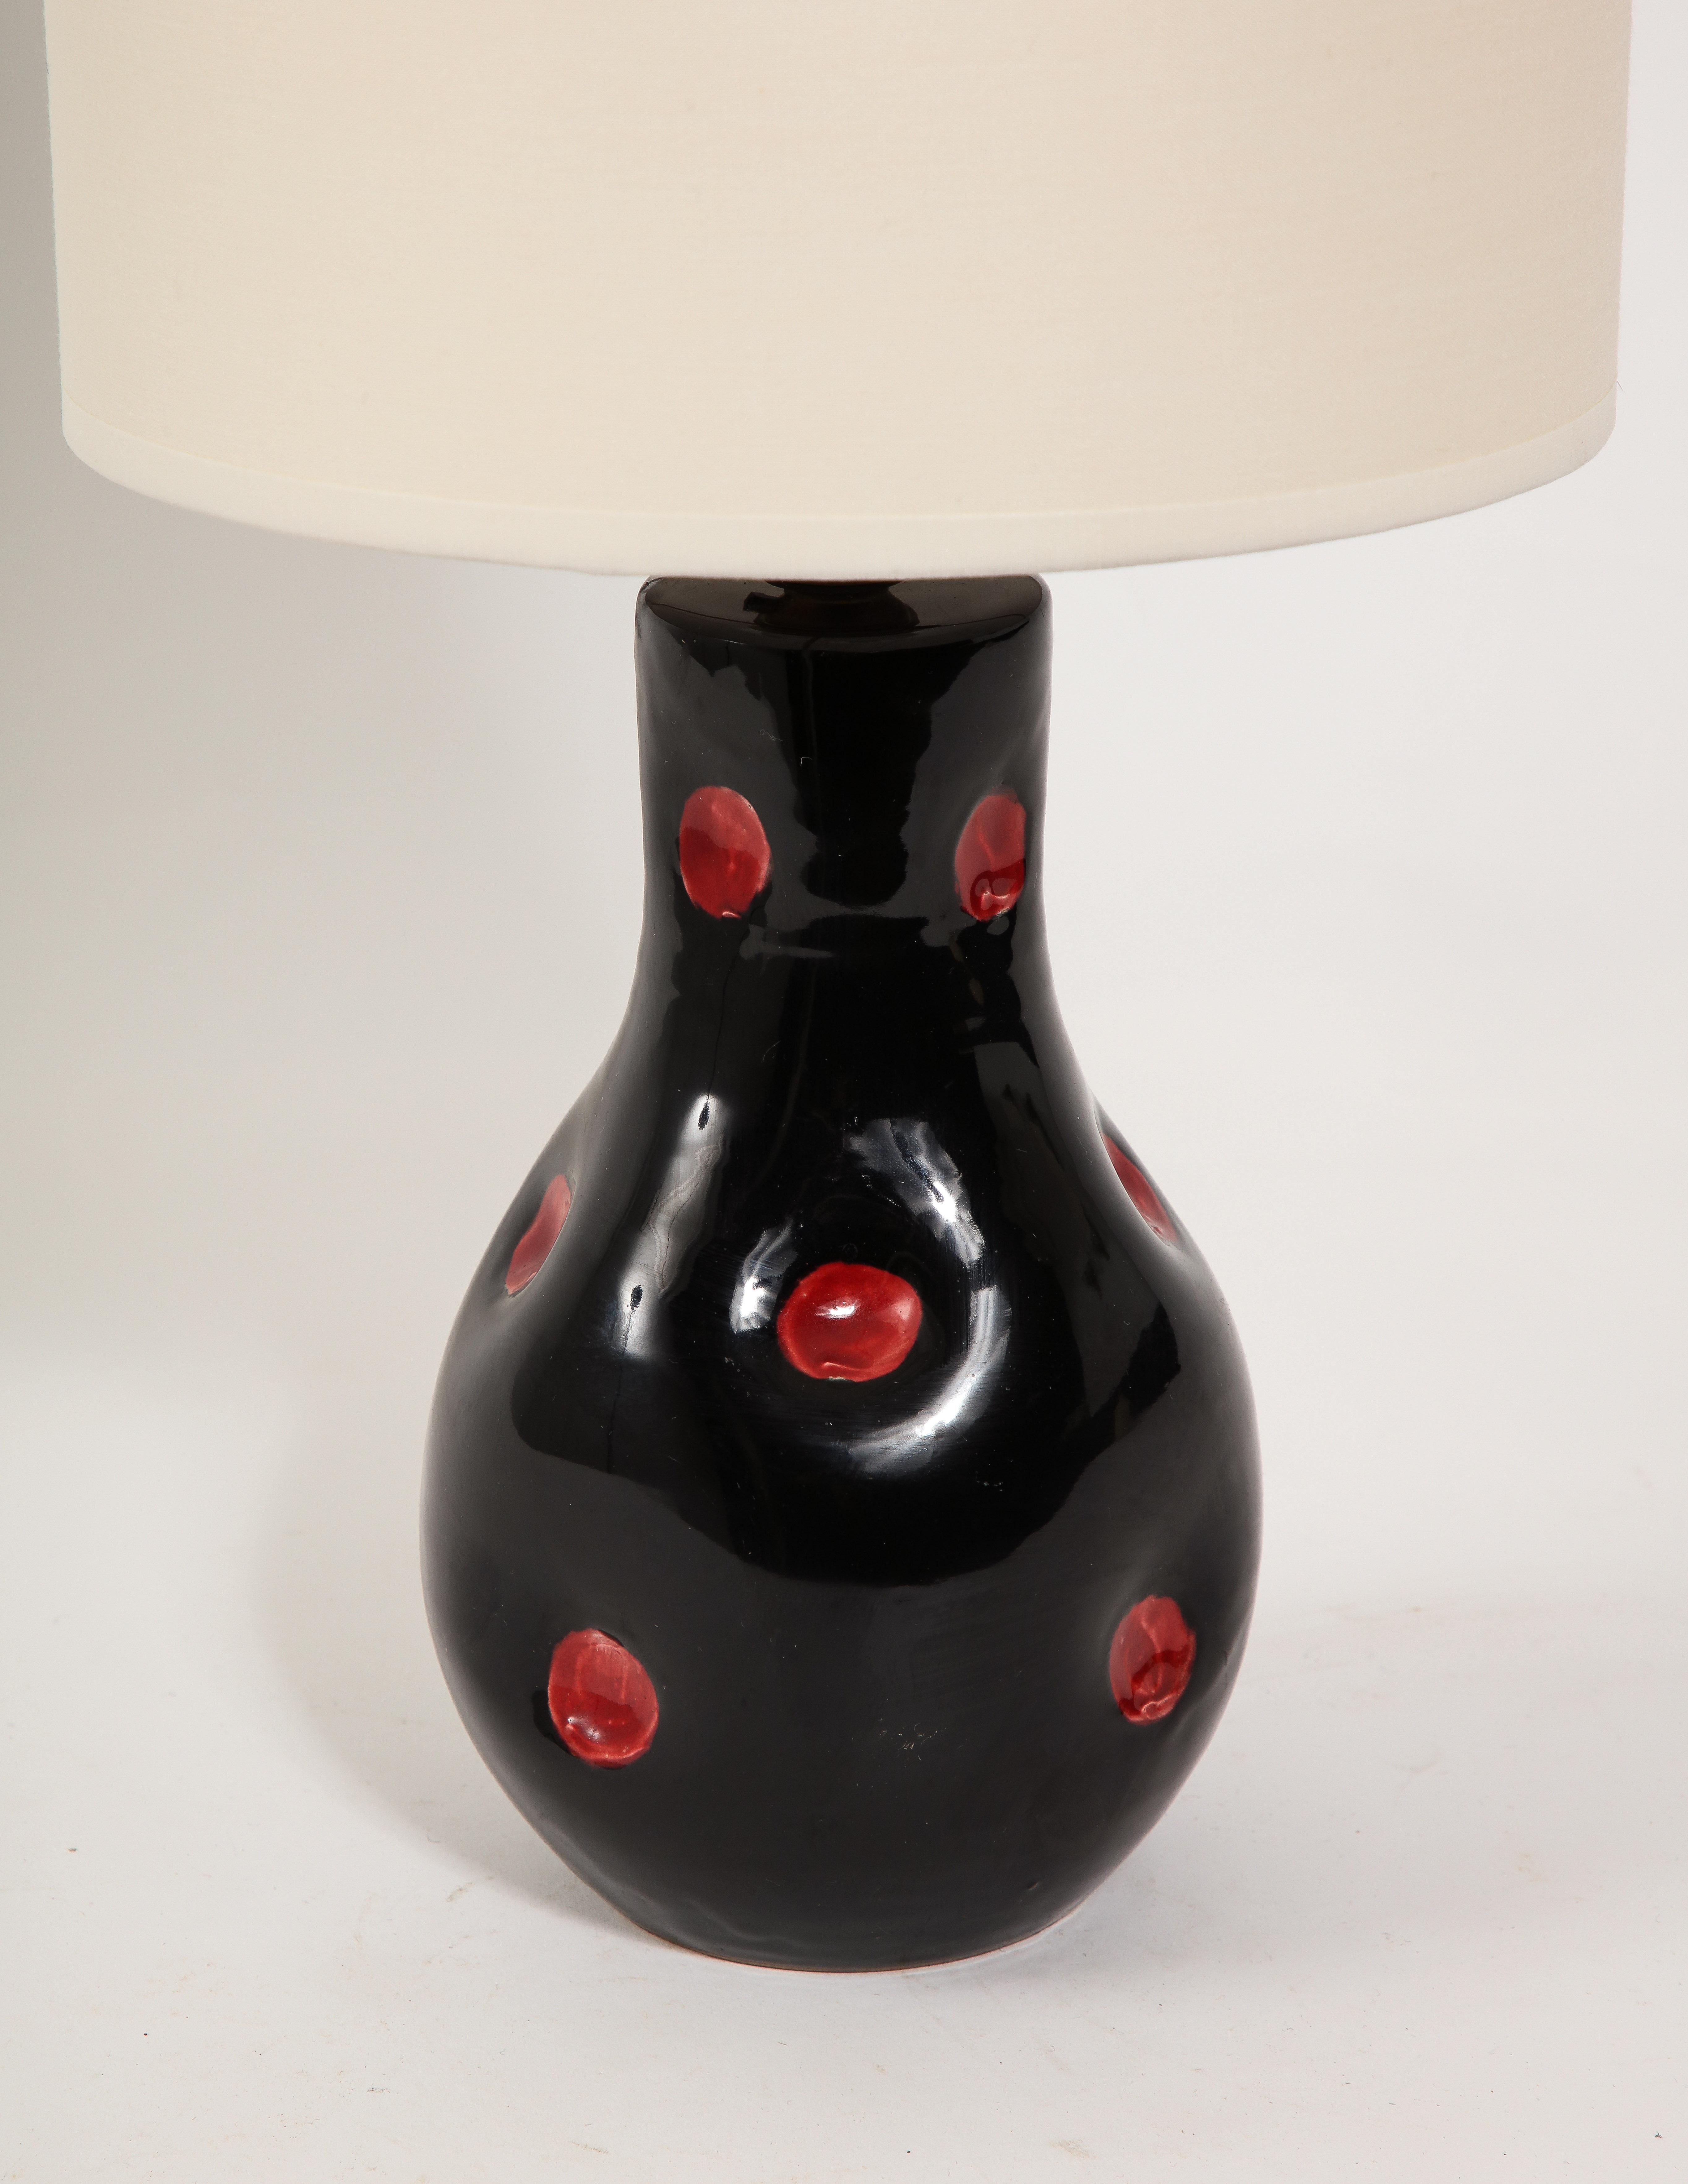 Black glazed ceramic lamp with a dimple decor accentuated by red glaze dots.

11x5x5 Base Only